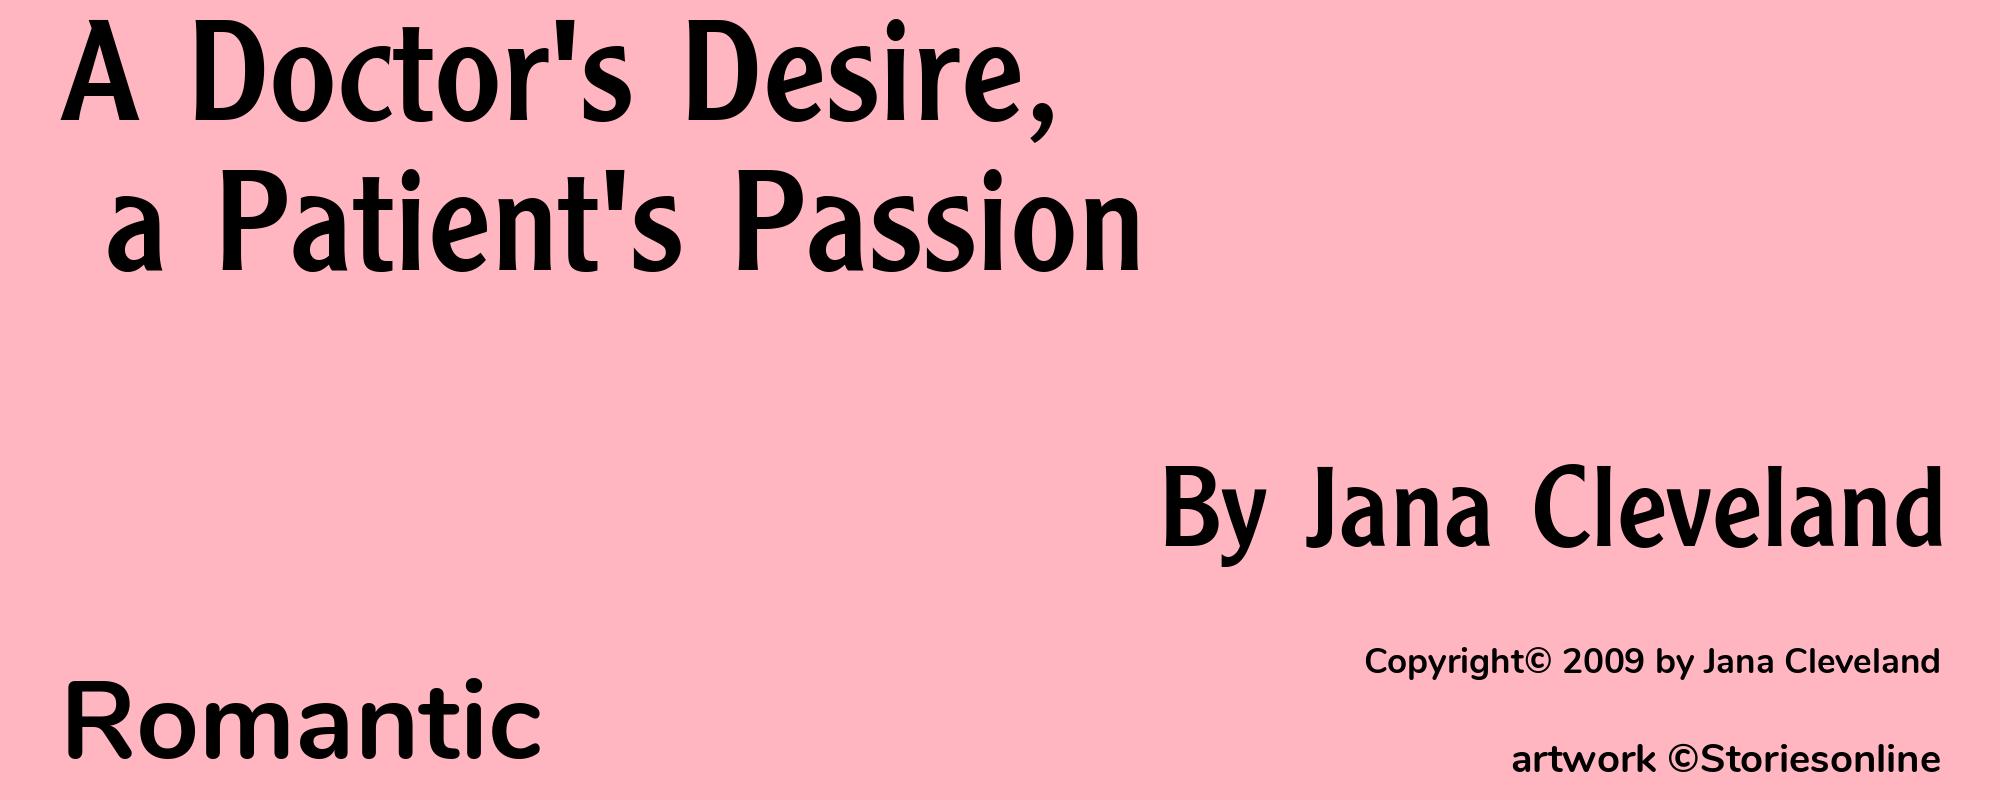 A Doctor's Desire, a Patient's Passion - Cover